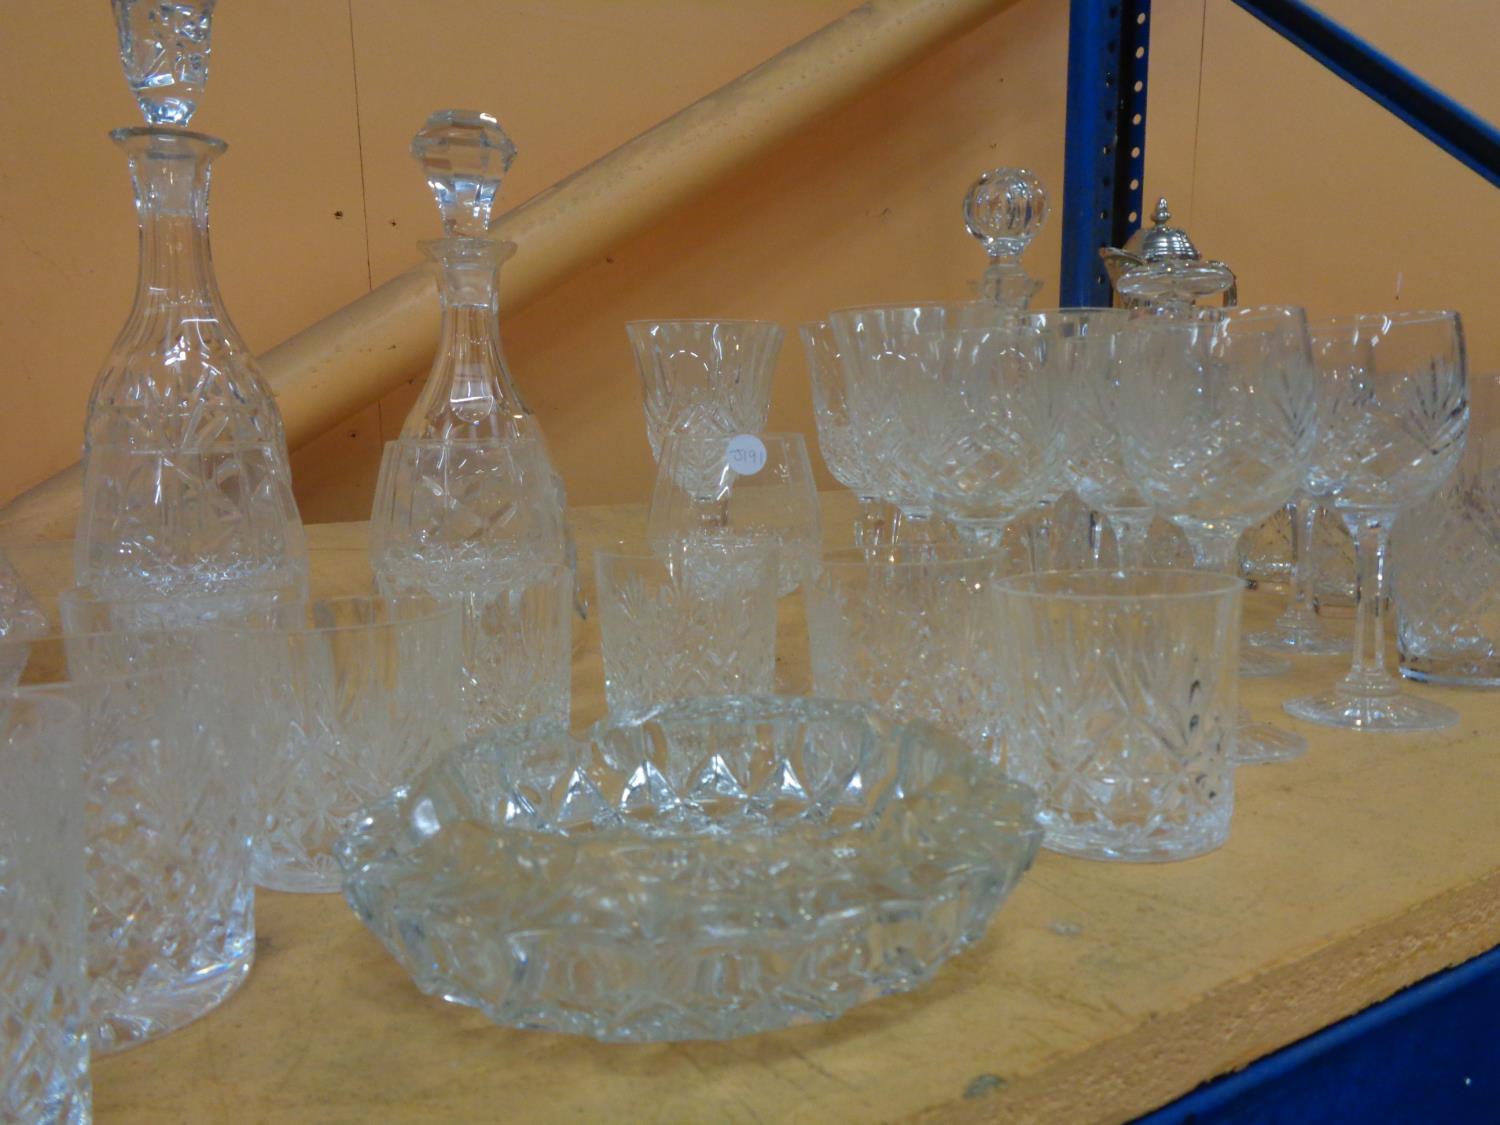 A LARGE COLLECTION OF GLASSWARE INCLUDING DECANTERS AND A VARIETY OF DRINKS GLASSES - Bild 6 aus 8